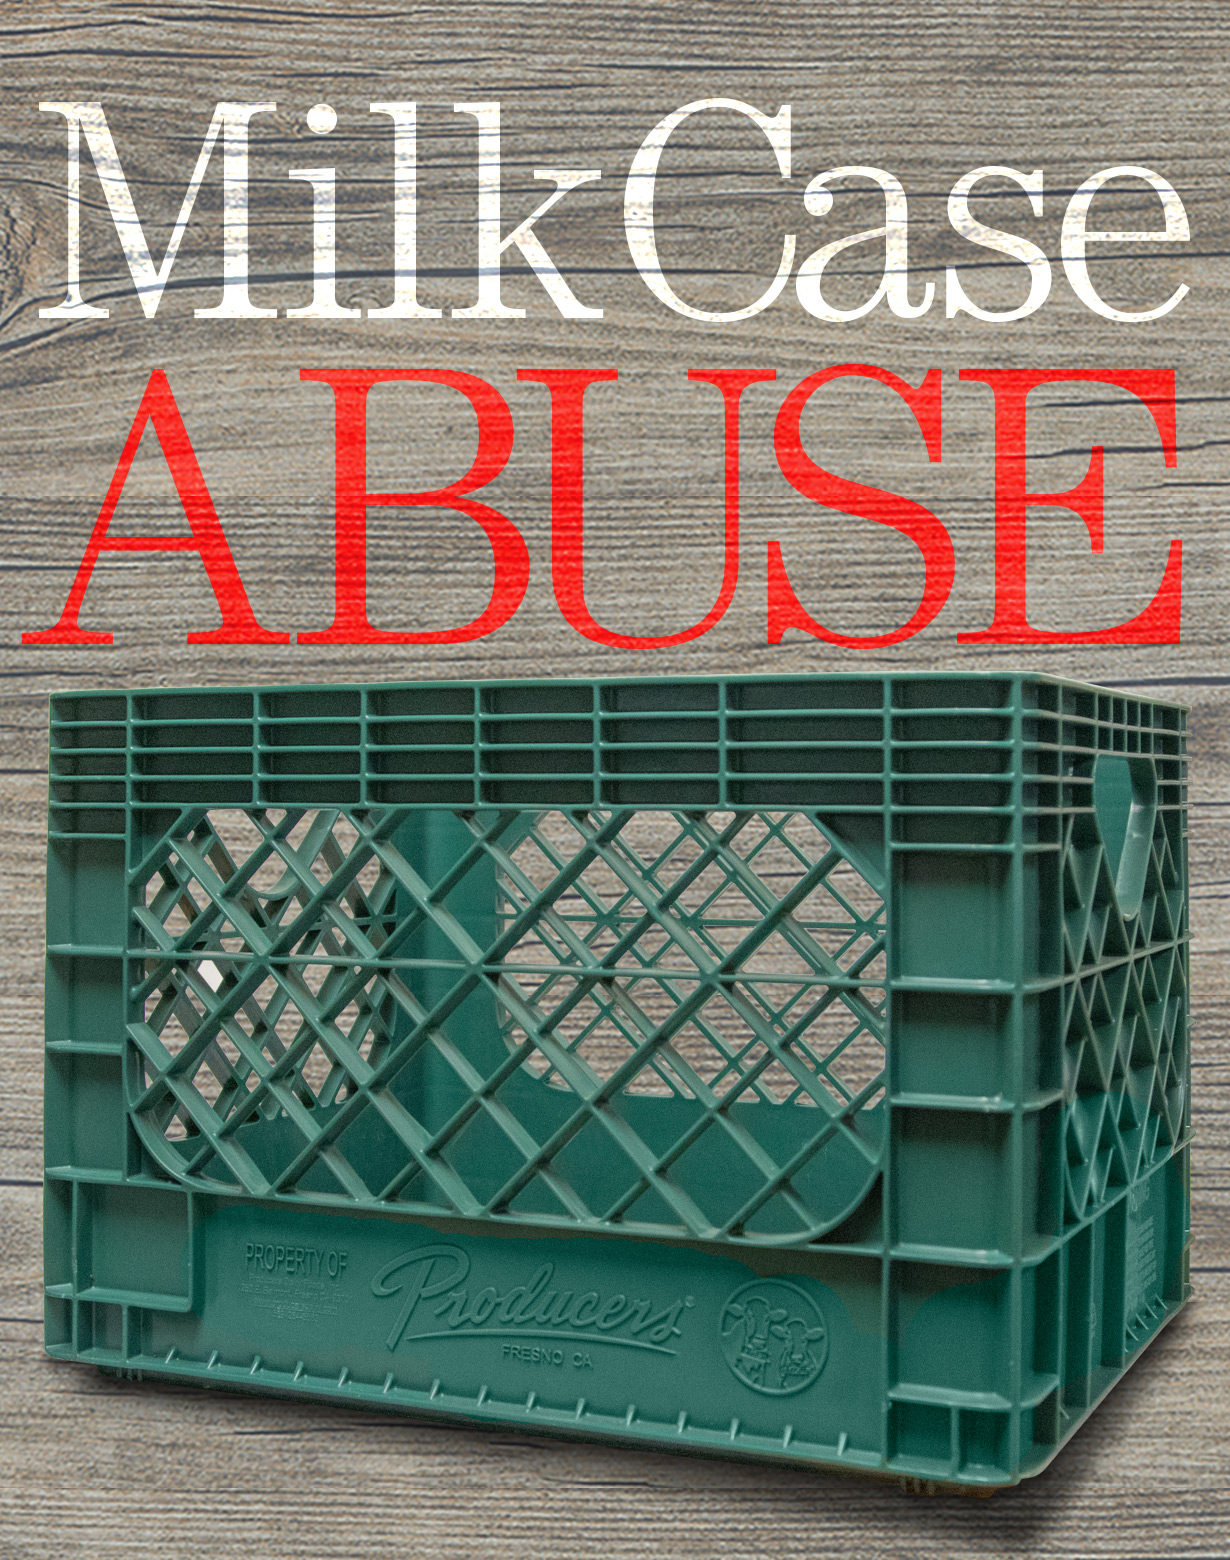 Click here to learn more about milk crate abuse.